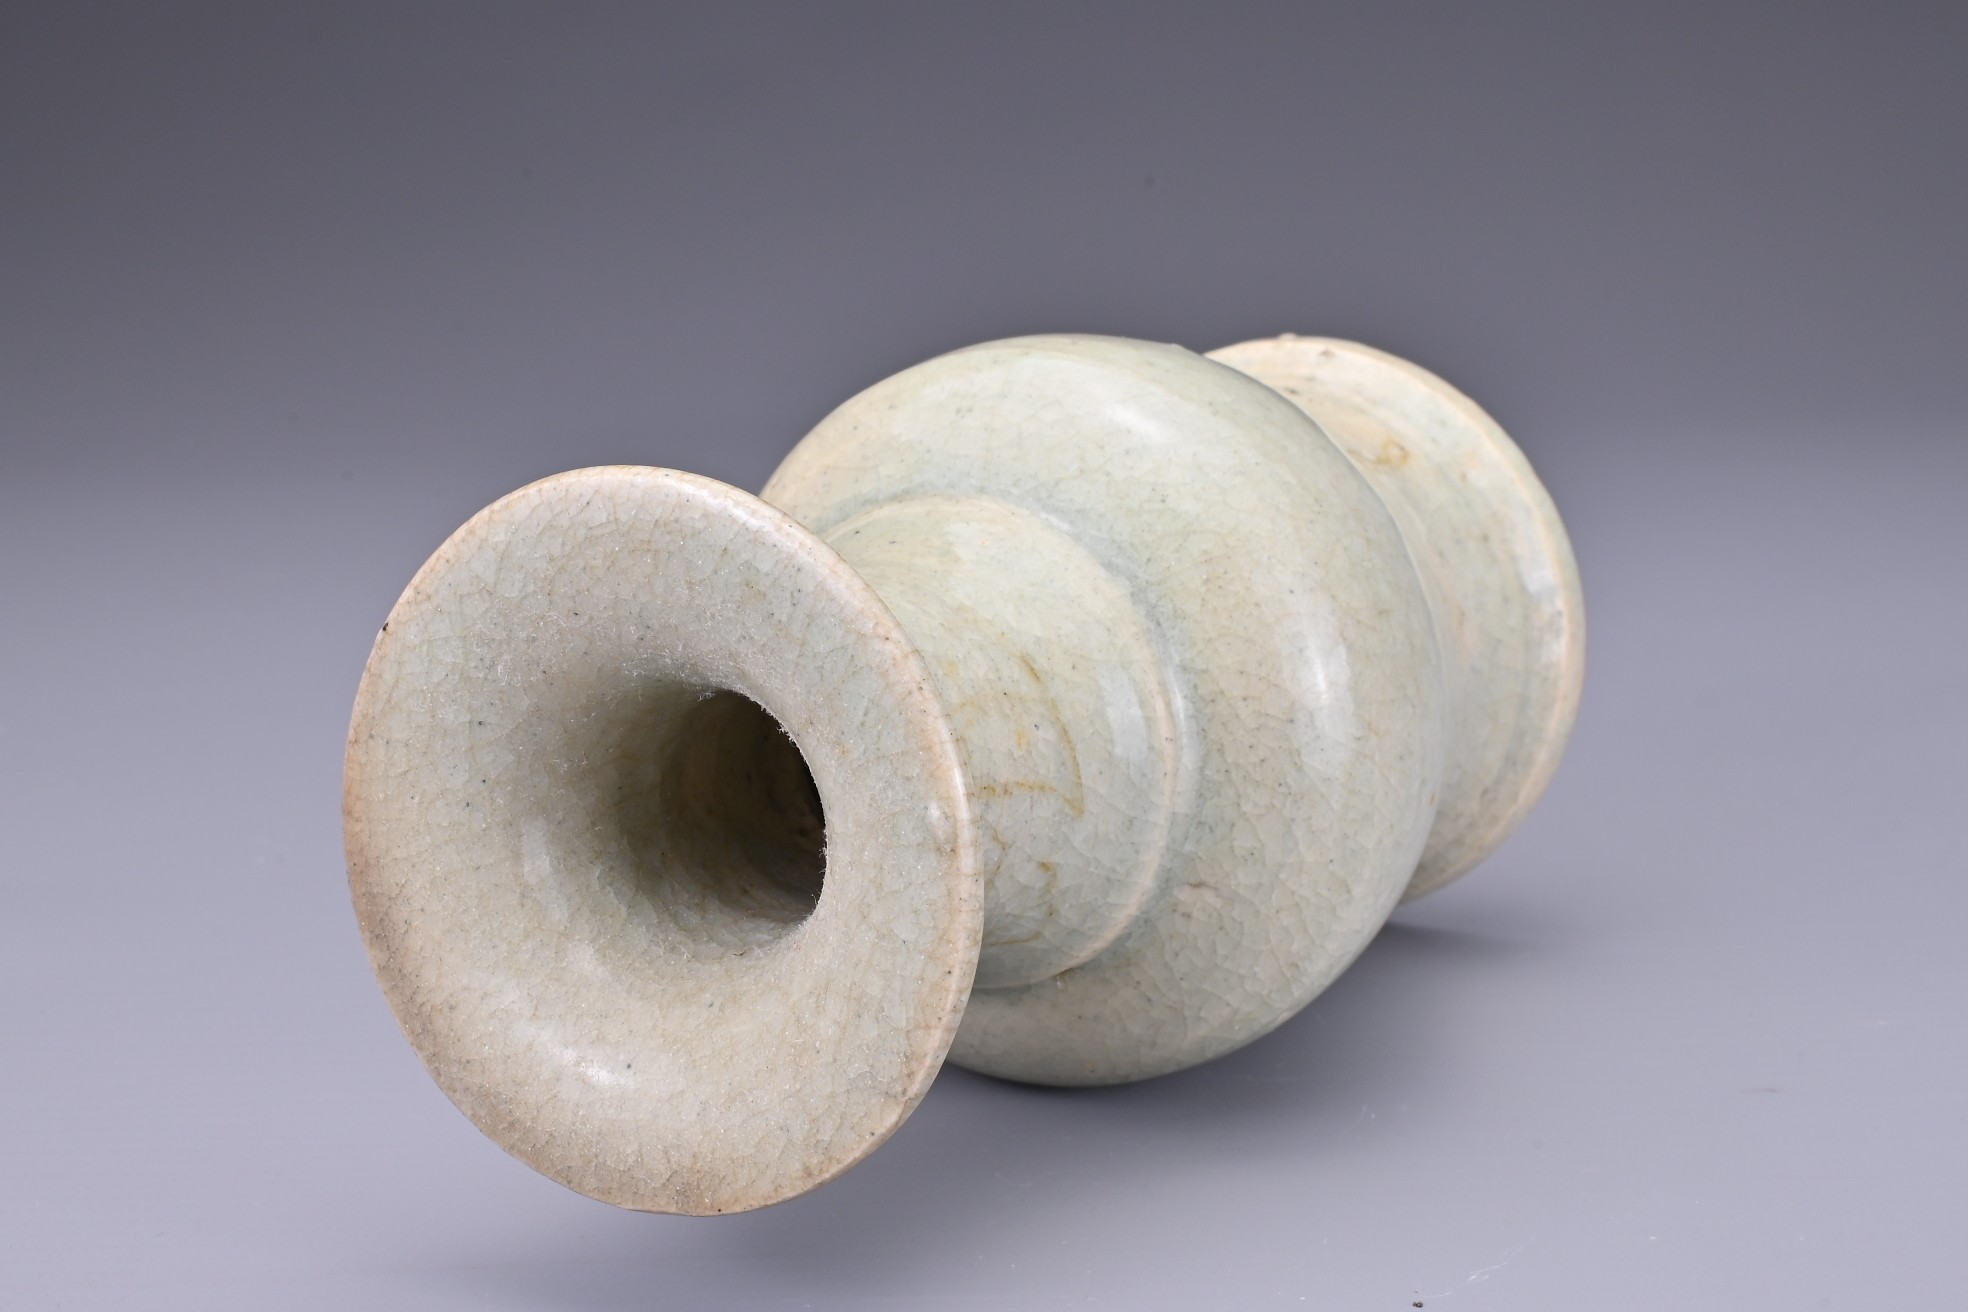 A CHINESE PALE CELADON VASE, LATE MING DYNASTY. Heavily potted with visible crackle throughout. 14. - Image 7 of 7